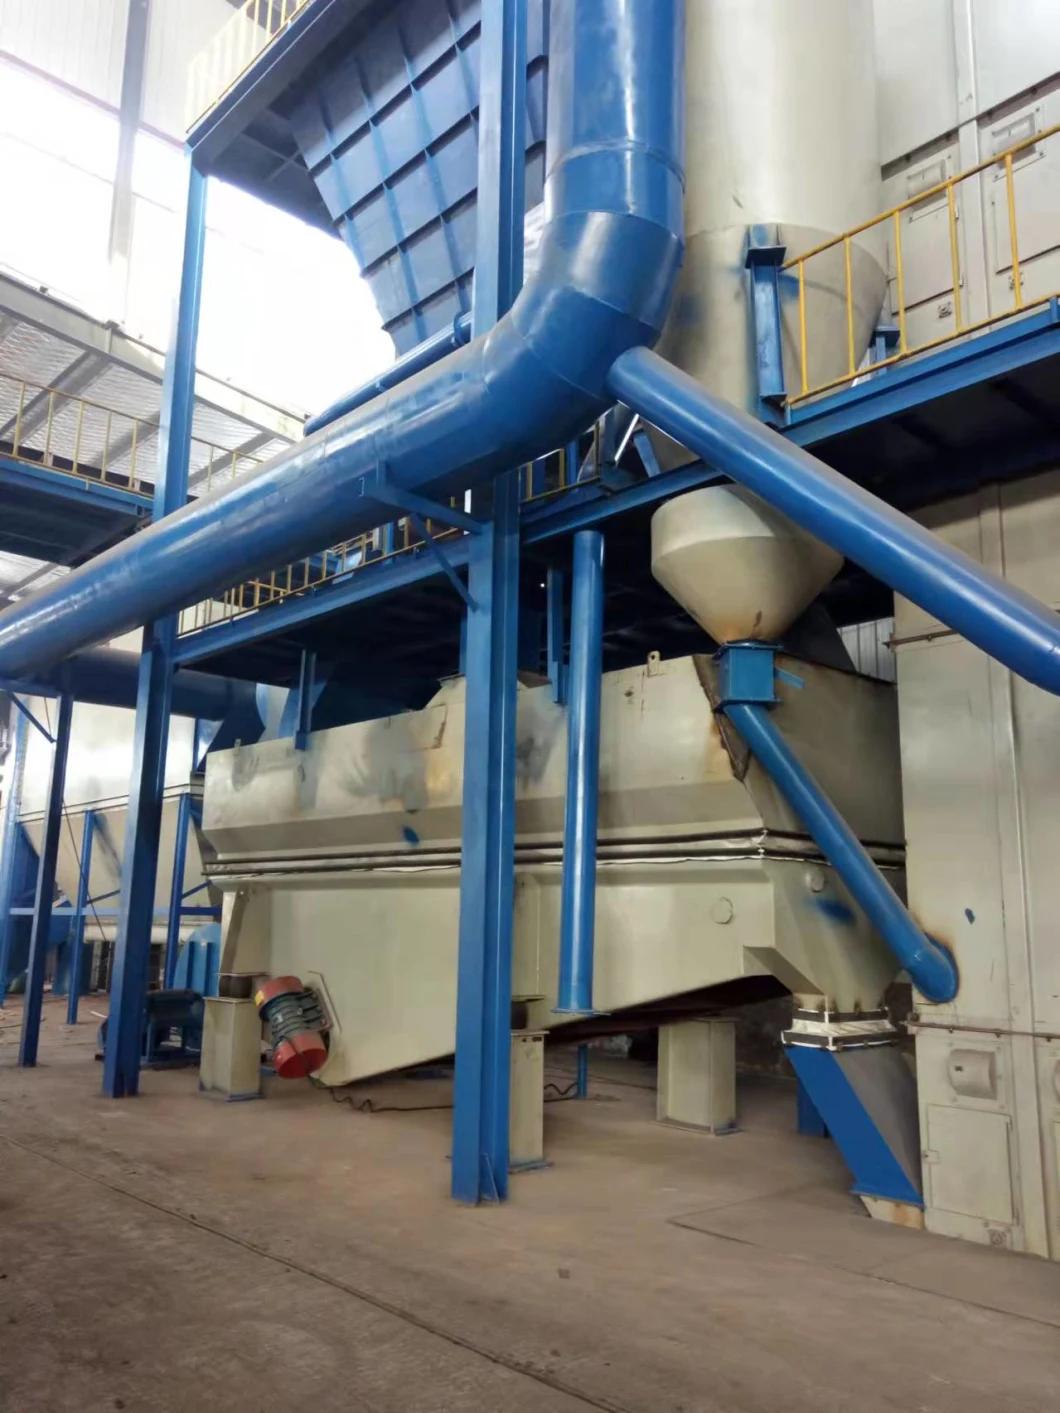 New Sand Cooling and Dust Pumping Equipment for The Foundry